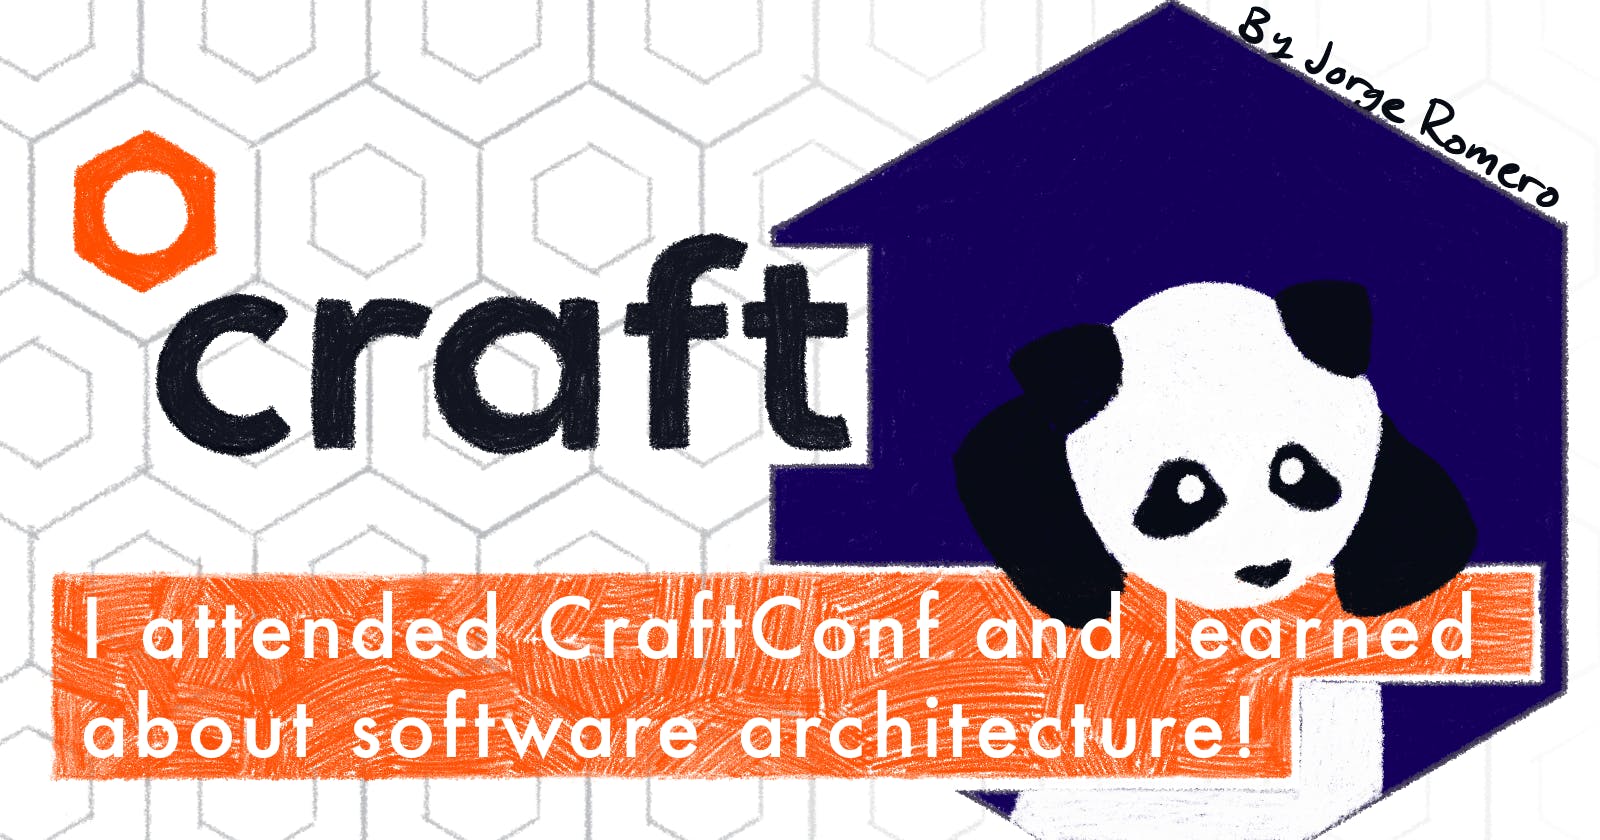 I attended CraftConf and learned about software architecture!